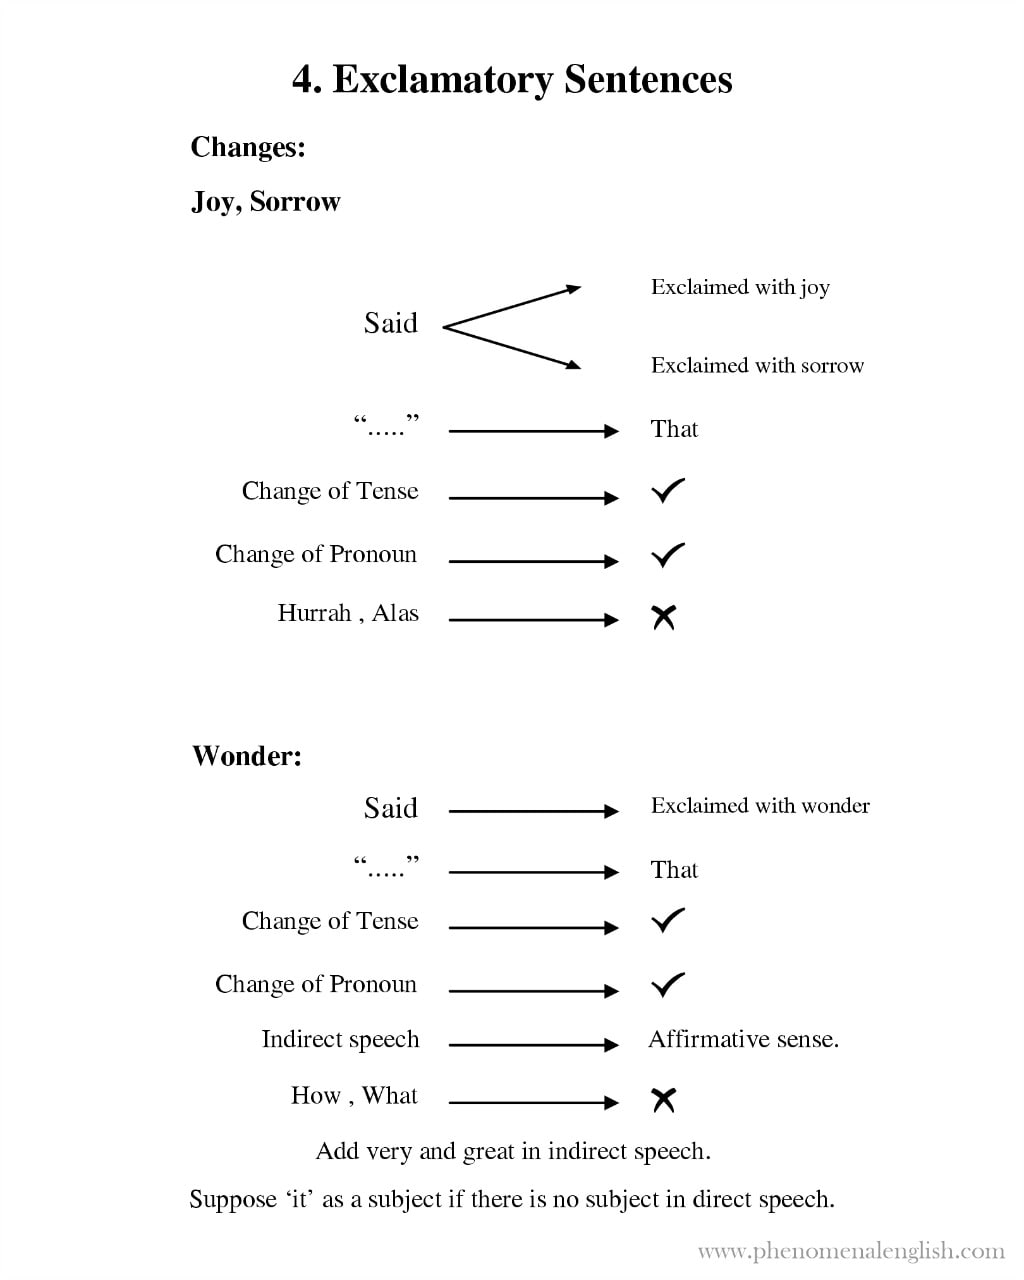 rules for change of exclamatory sentences in direct and indirect